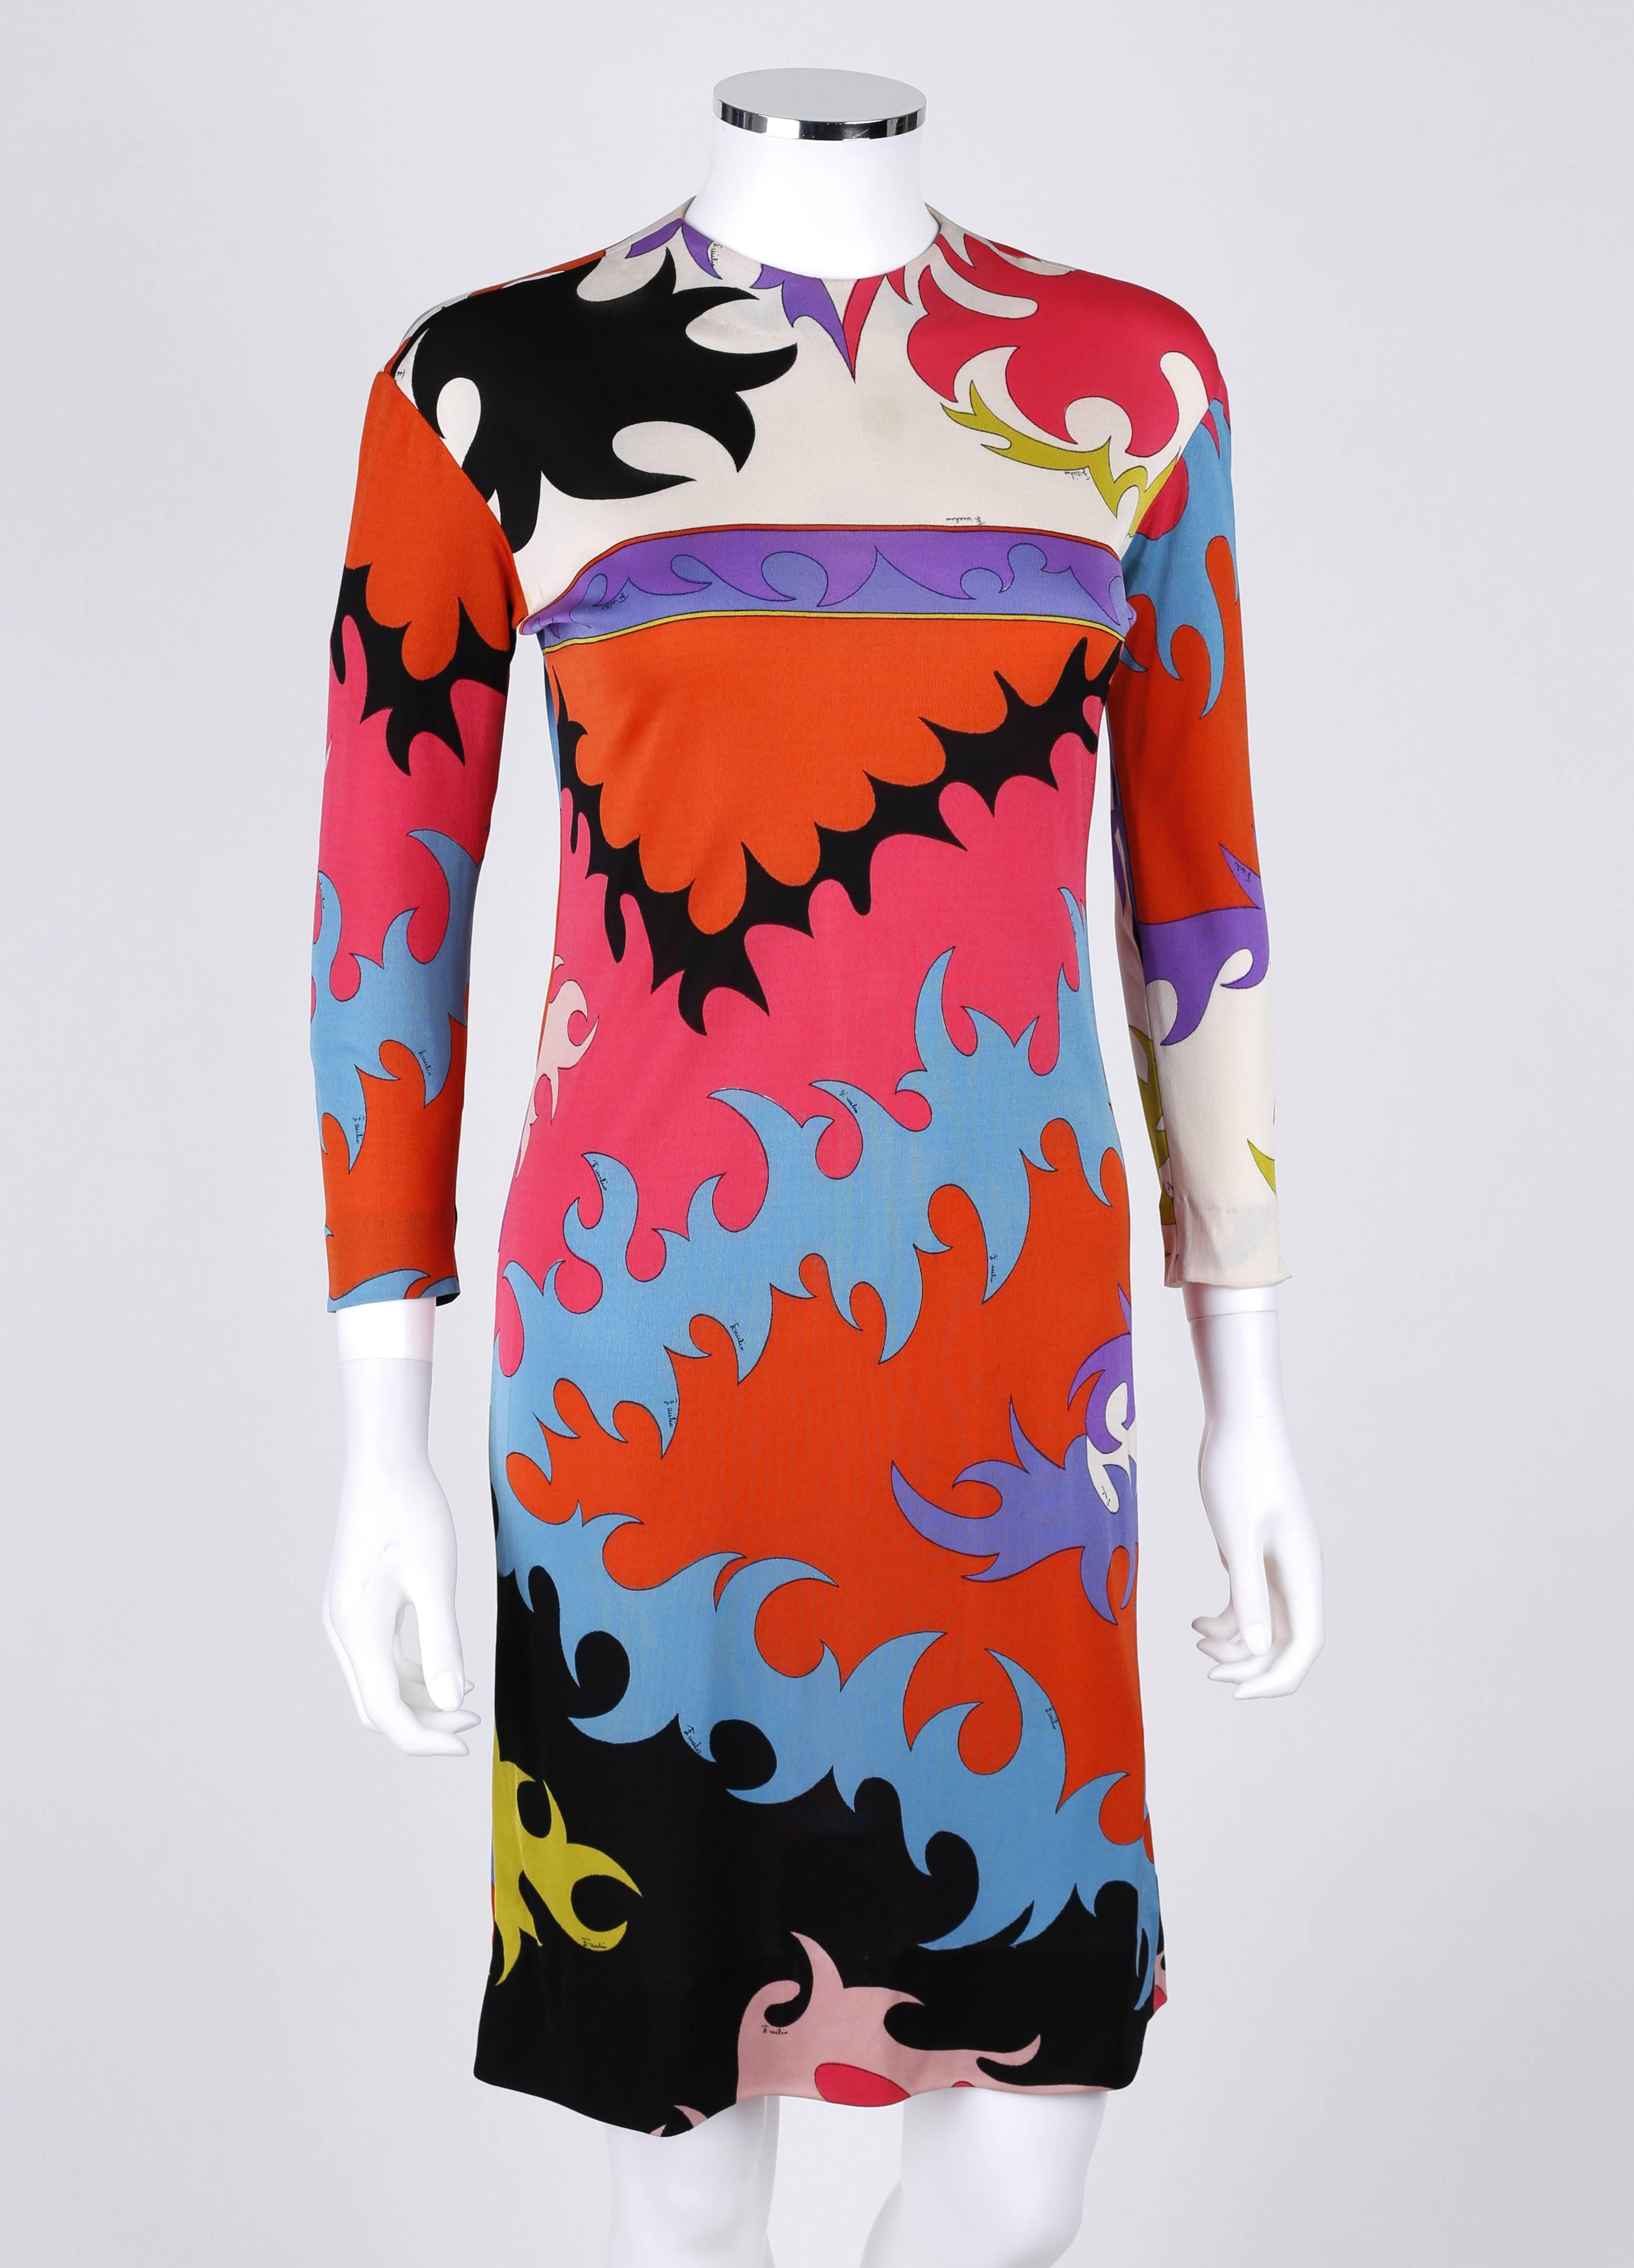 Vintage c.1960's Emilio Pucci for Saks Fifth Avenue silk jersey shift dress. Muticolor abstract signature print in shades of pink, orange, green, blue, purple, black, and white. 3/4 length sleeves. Crew neck. Center back invisible zipper with hook